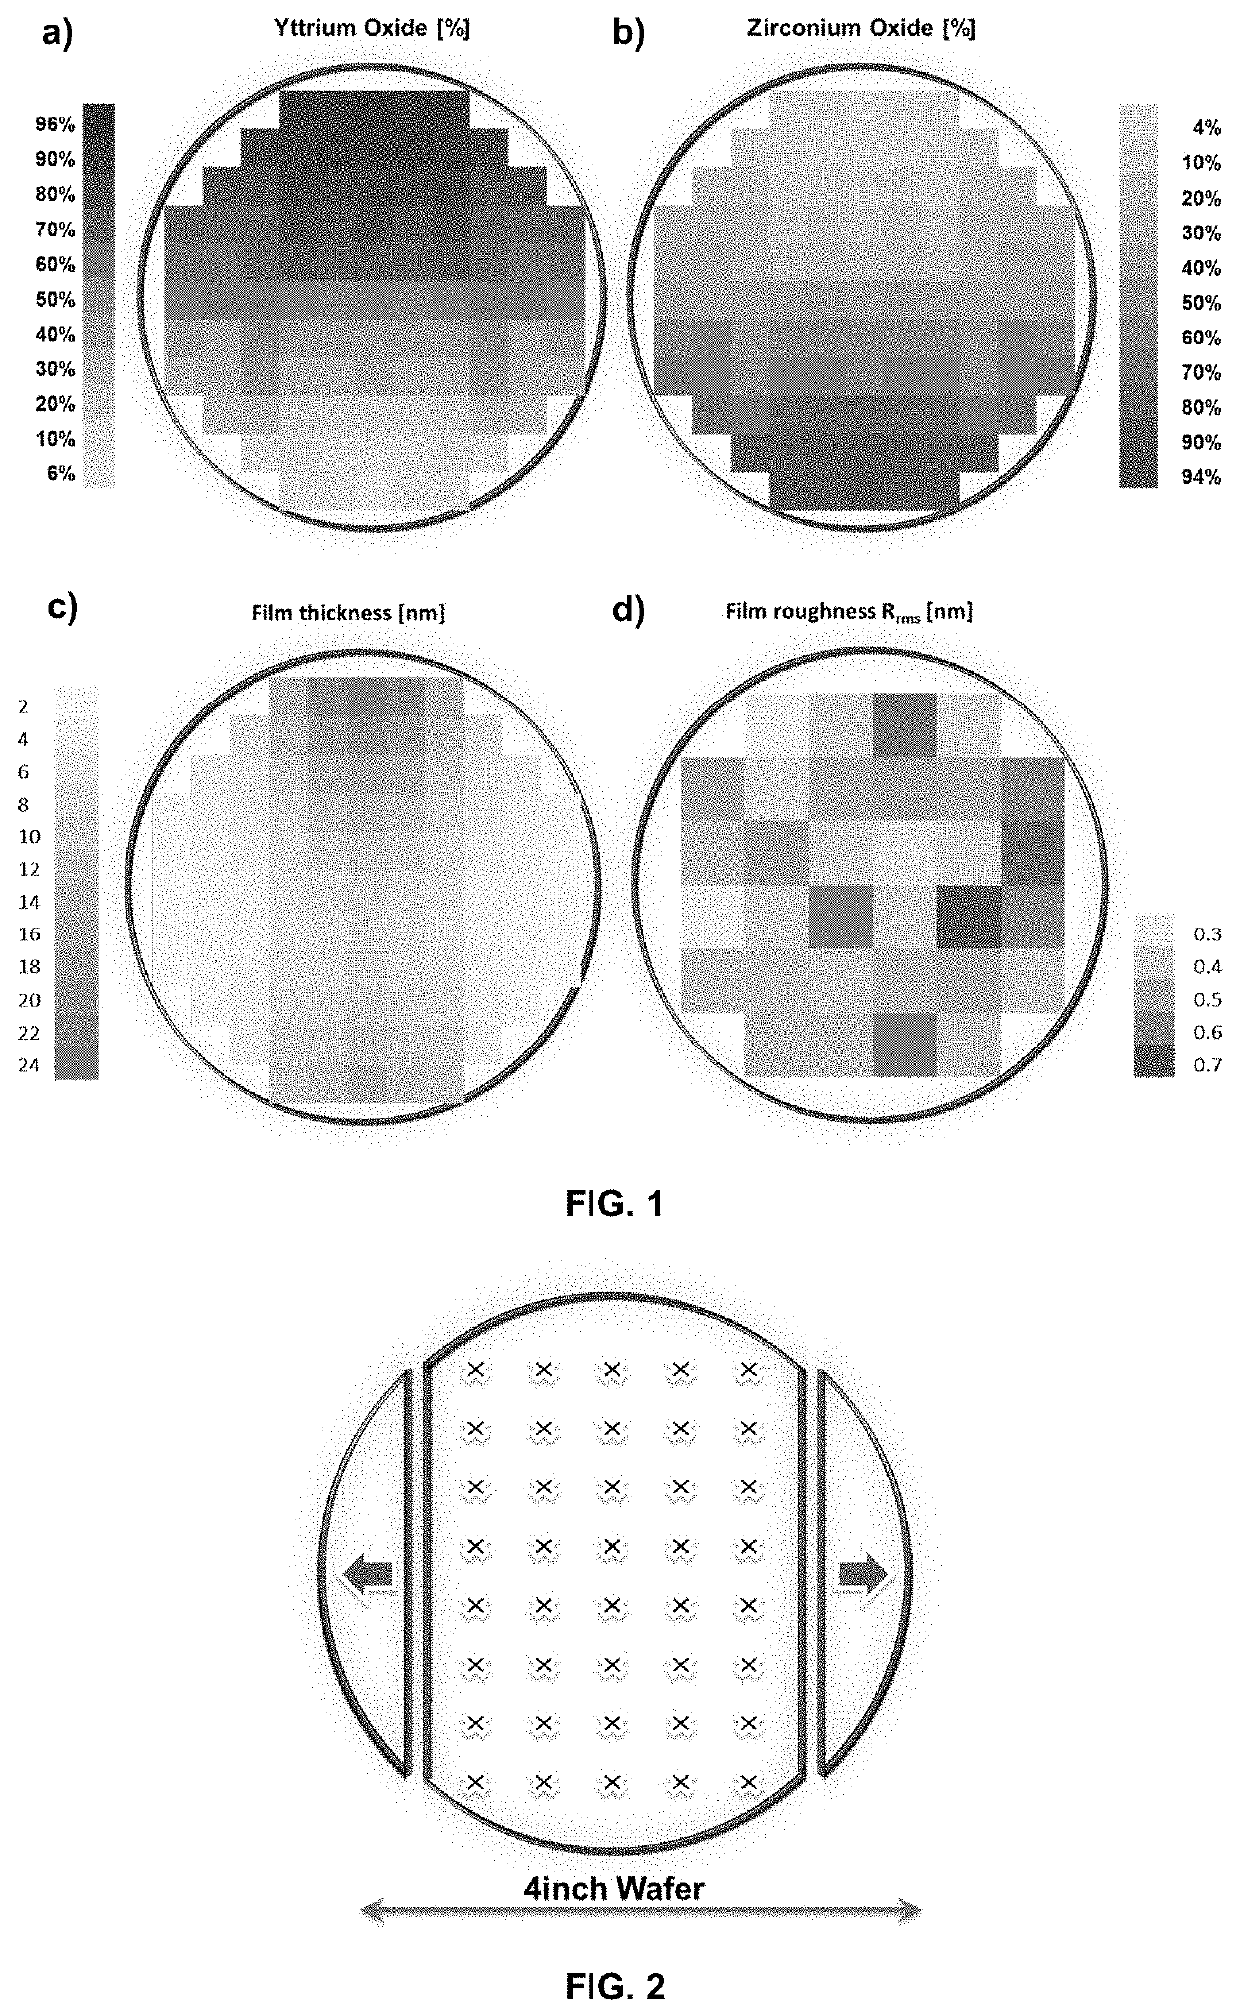 Thin film deposited inorganic metal oxide as a selective substrate for mammalian cell culture and as an implant coating